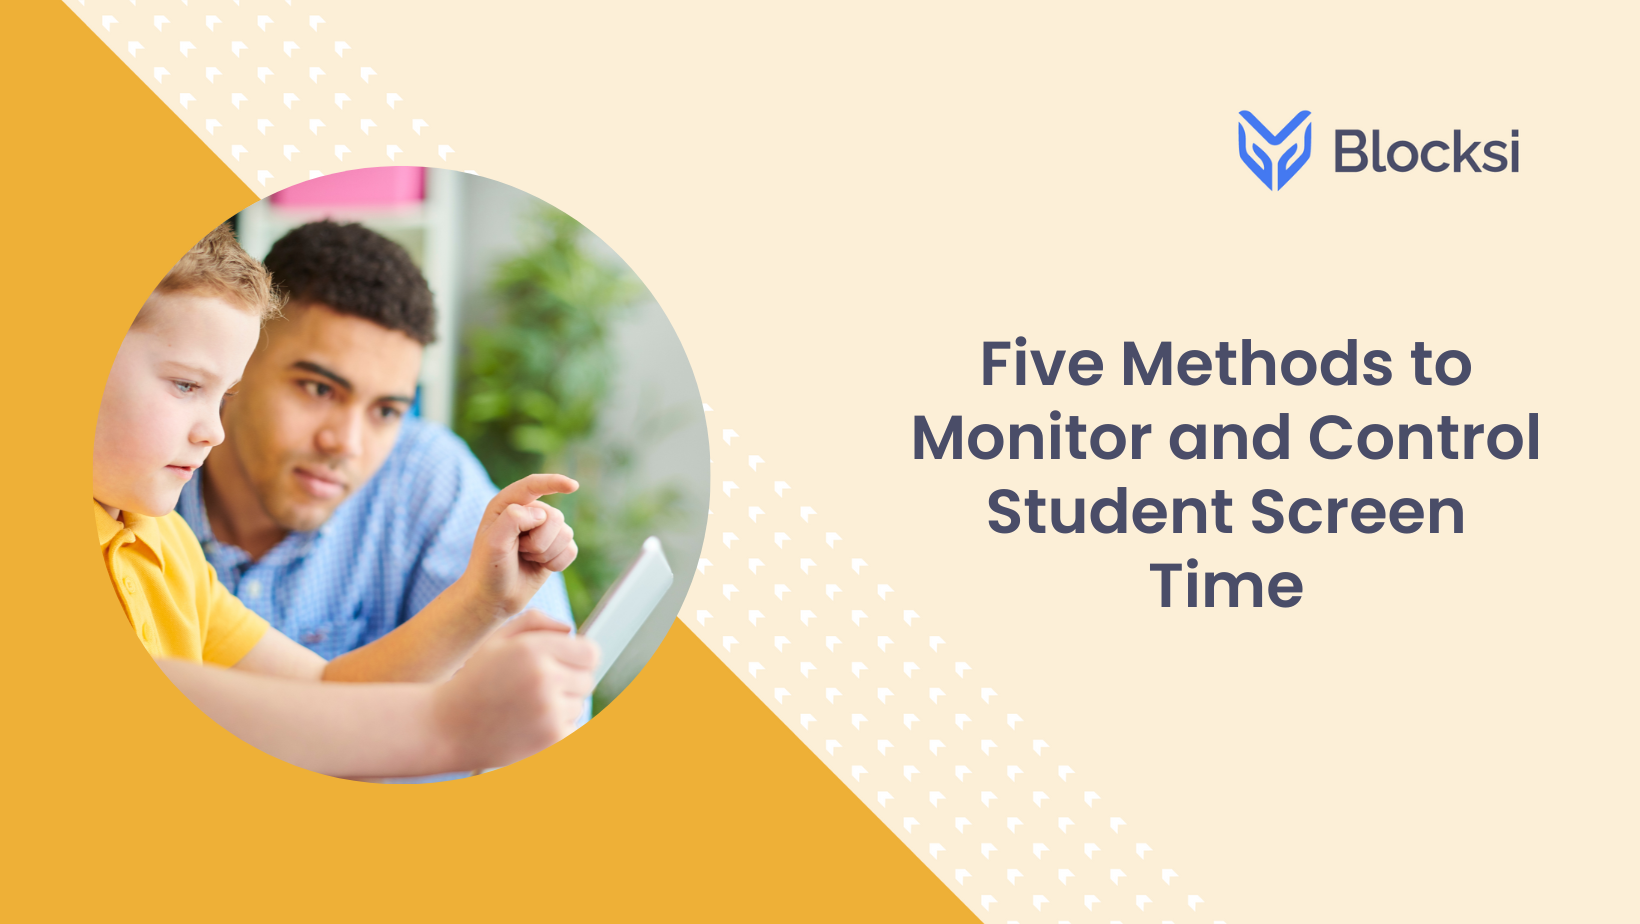 Five Methods to Monitor and Control Student Screen Time